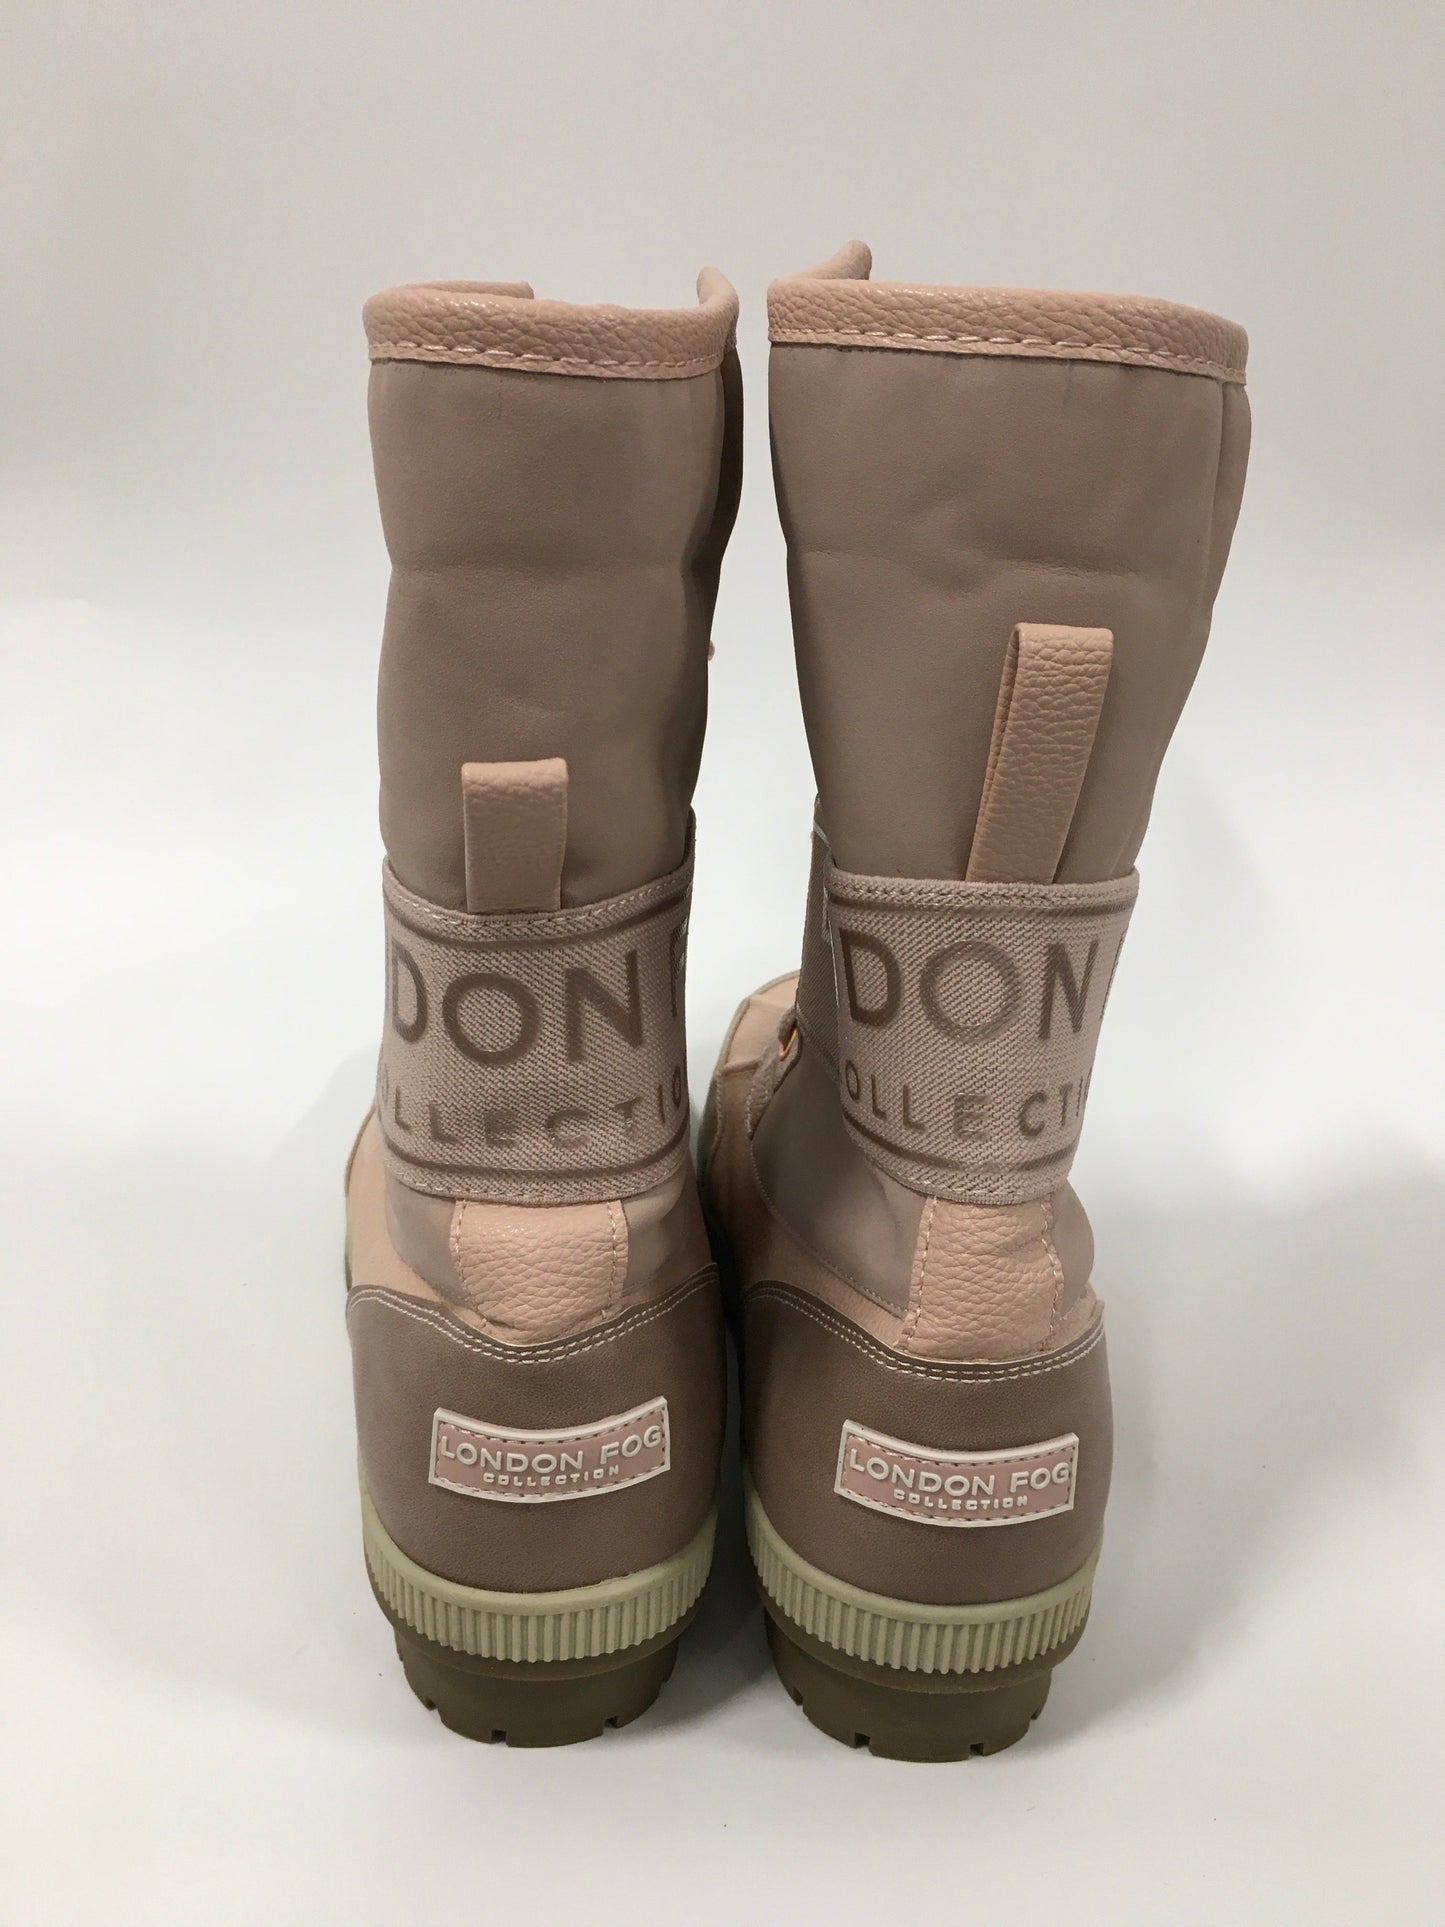 Pink Boots Snow London Fog, Size 9